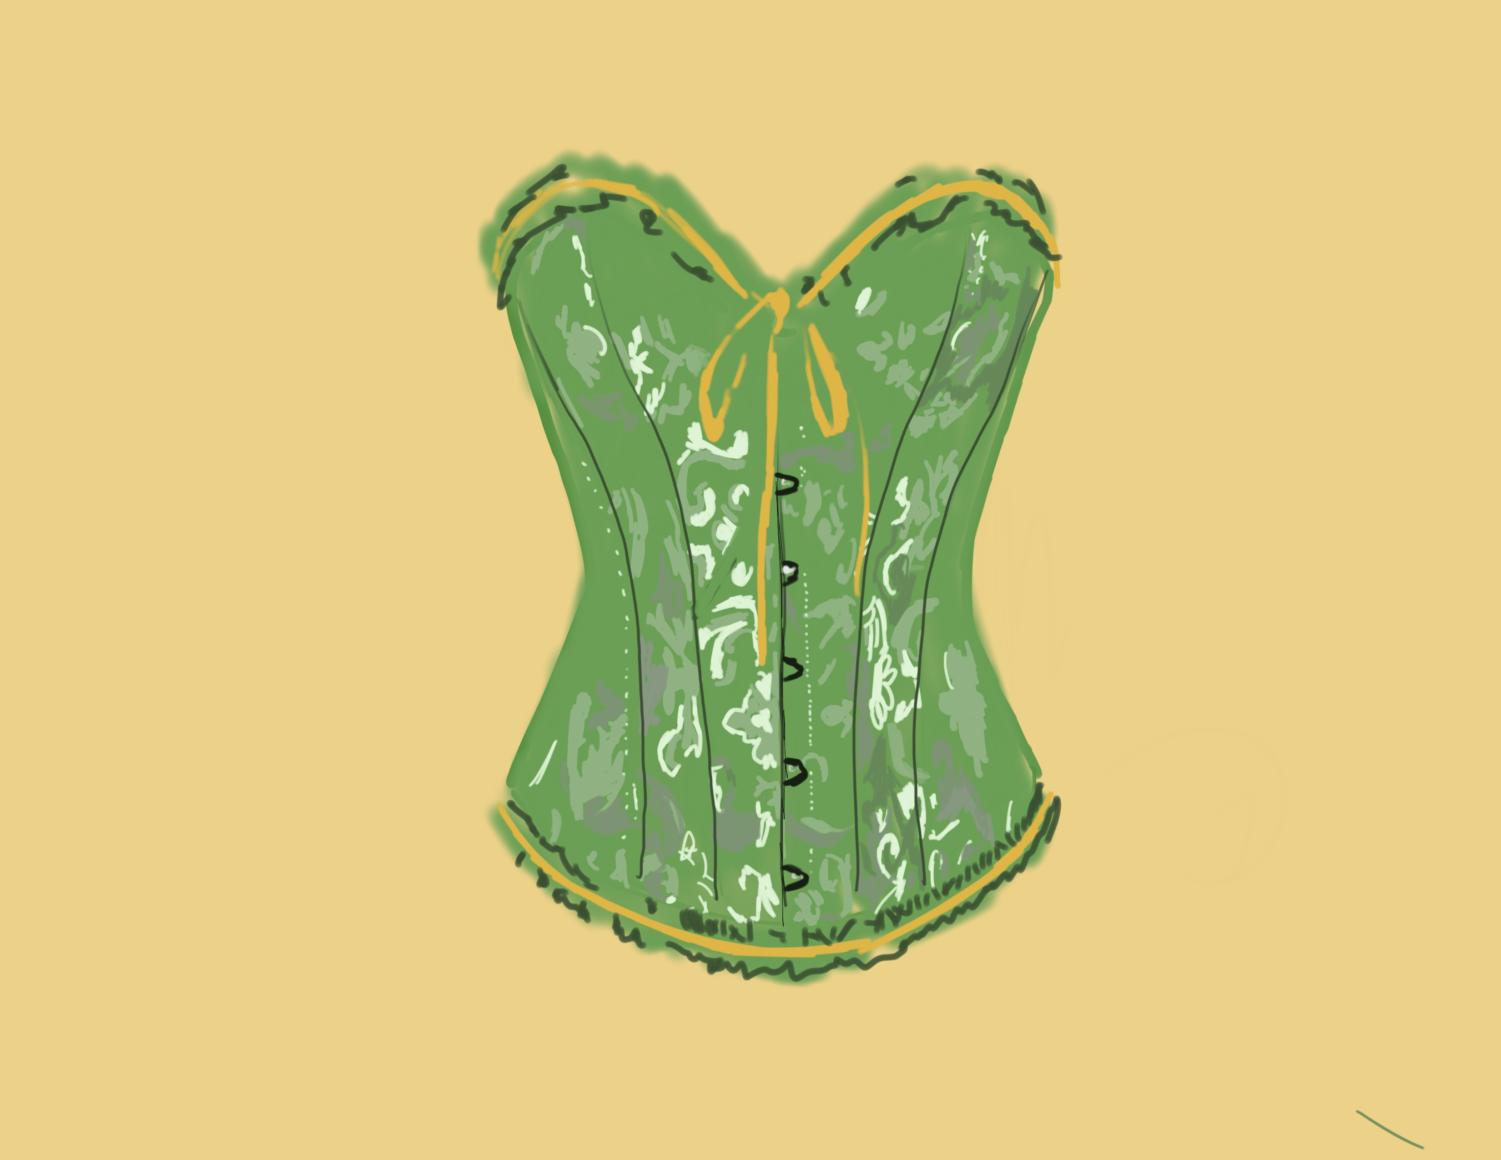 The history behind corsets: how a piece of clothing sparked